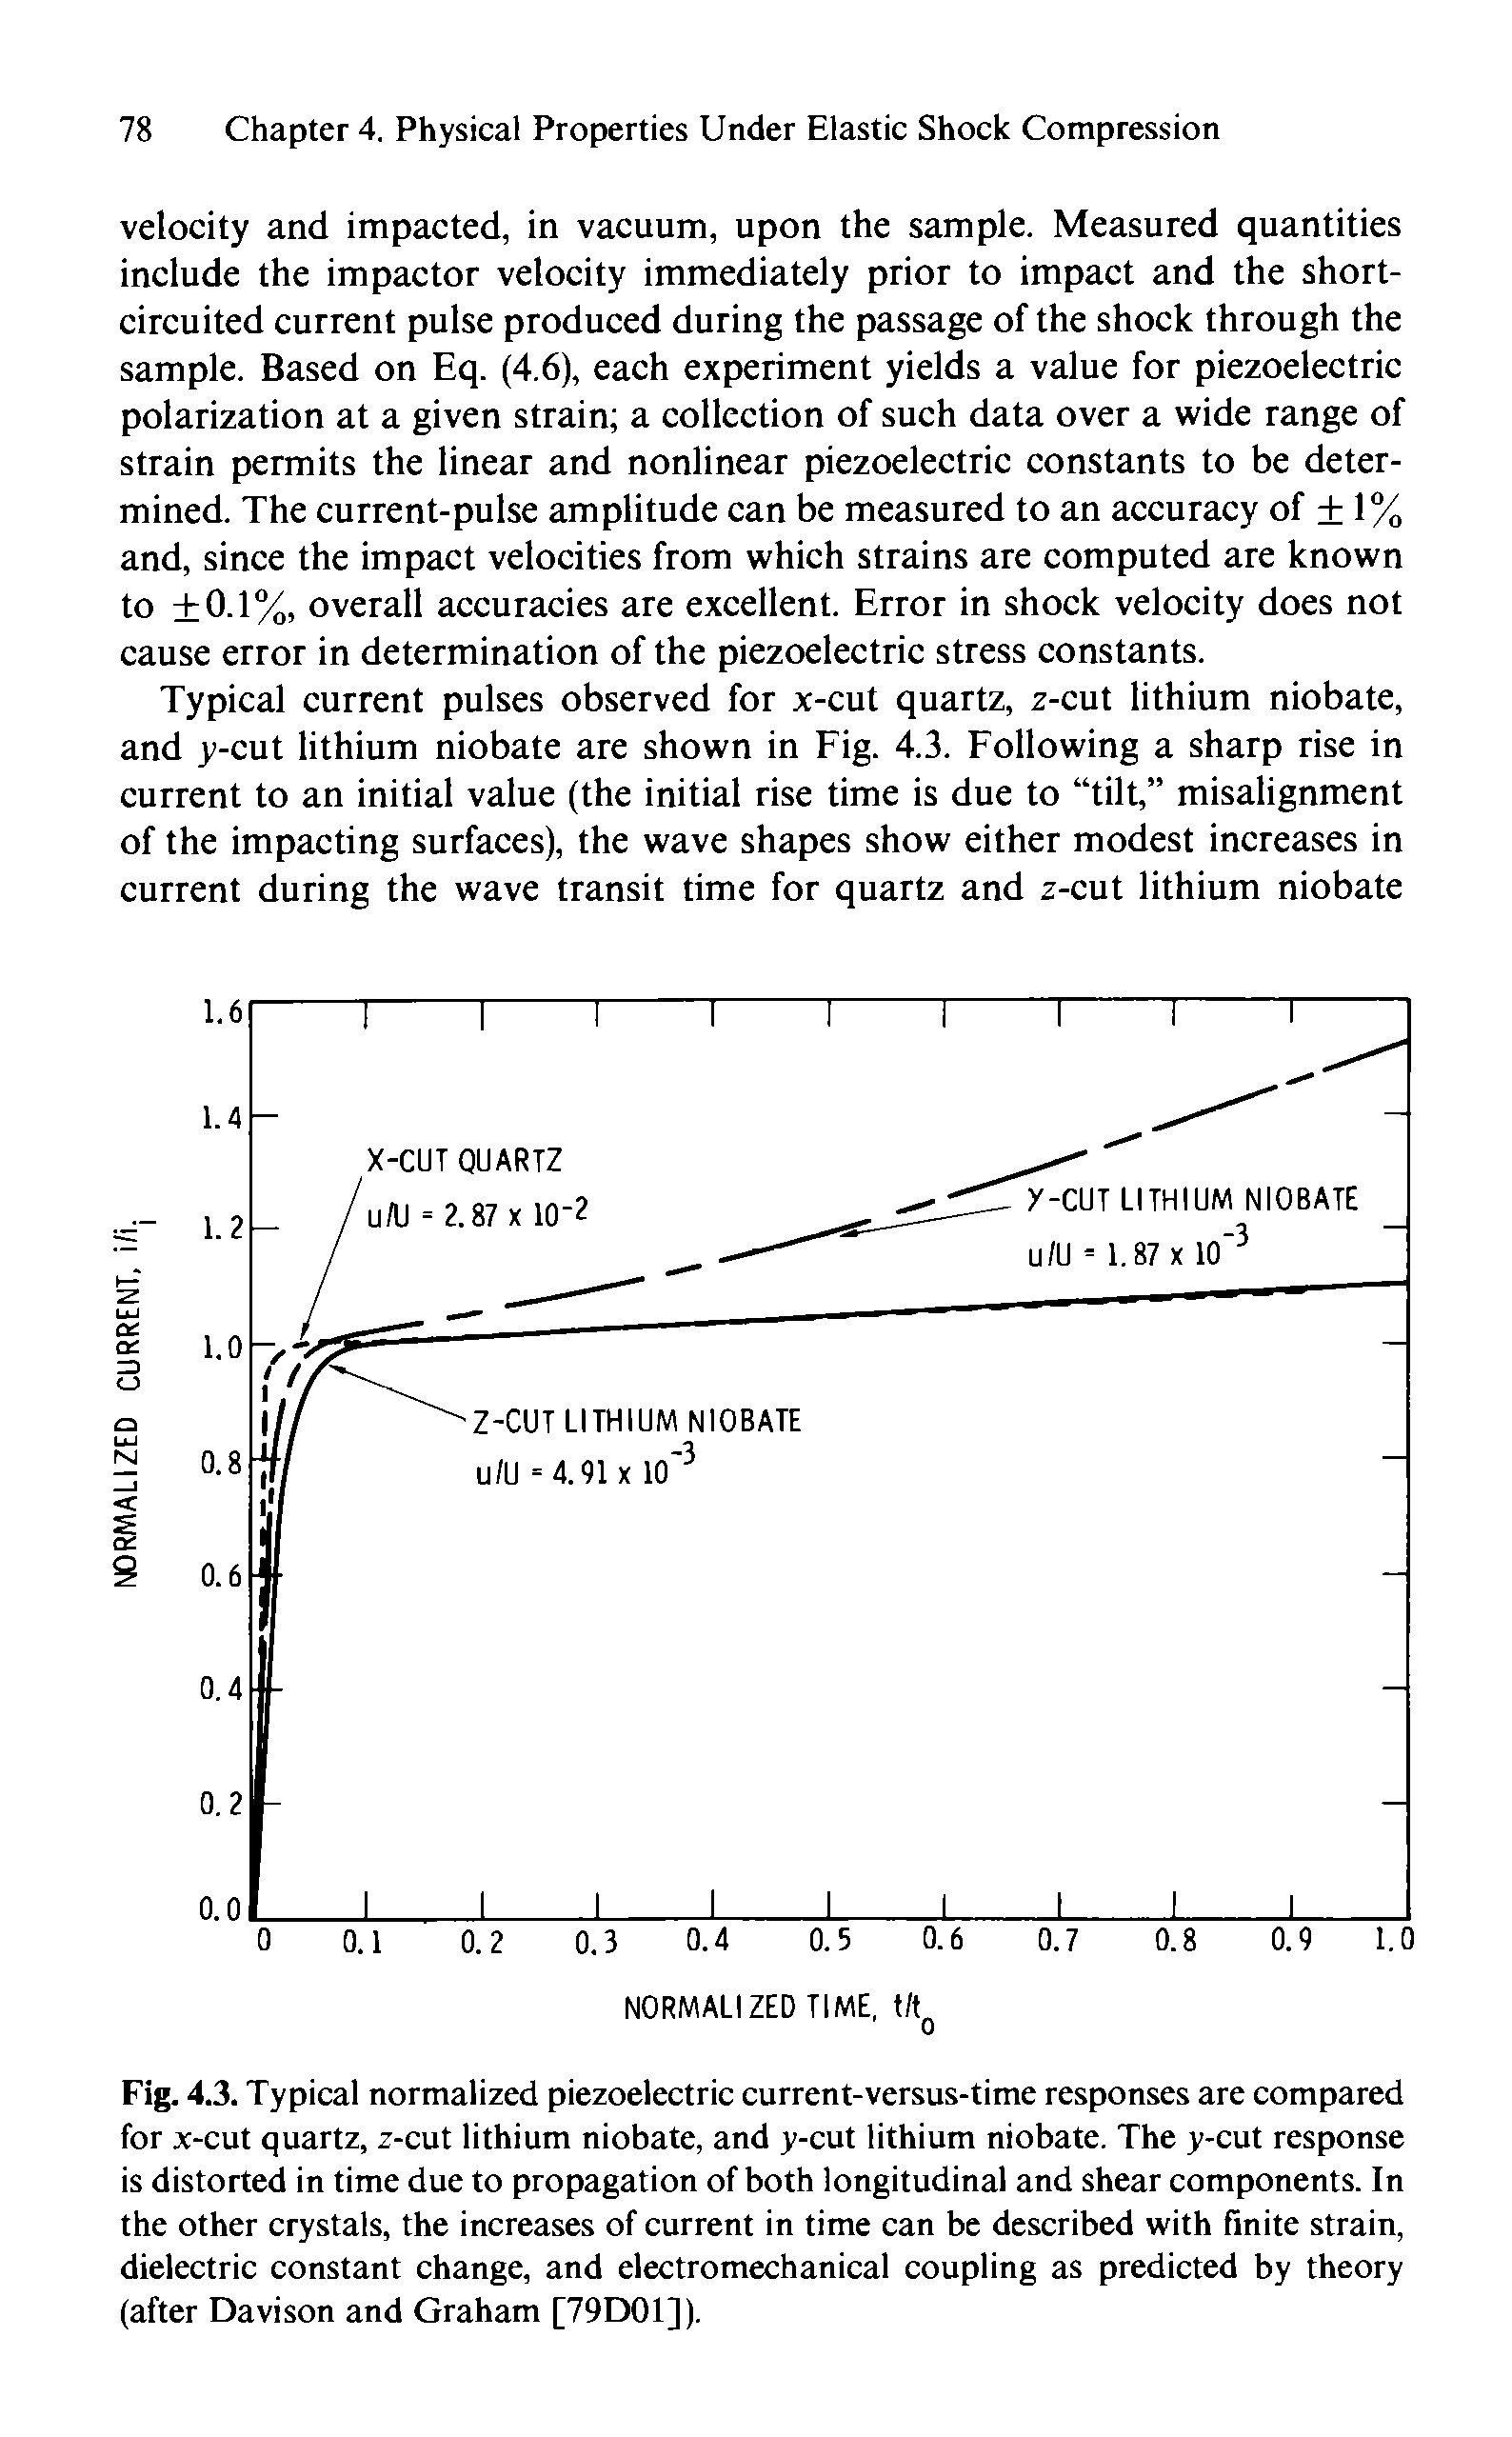 Fig. 4.3. Typical normalized piezoelectric current-versus-time responses are compared for x-cut quartz, z-cut lithium niobate, and y-cut lithium niobate. The y-cut response is distorted in time due to propagation of both longitudinal and shear components. In the other crystals, the increases of current in time can be described with finite strain, dielectric constant change, and electromechanical coupling as predicted by theory (after Davison and Graham [79D01]).